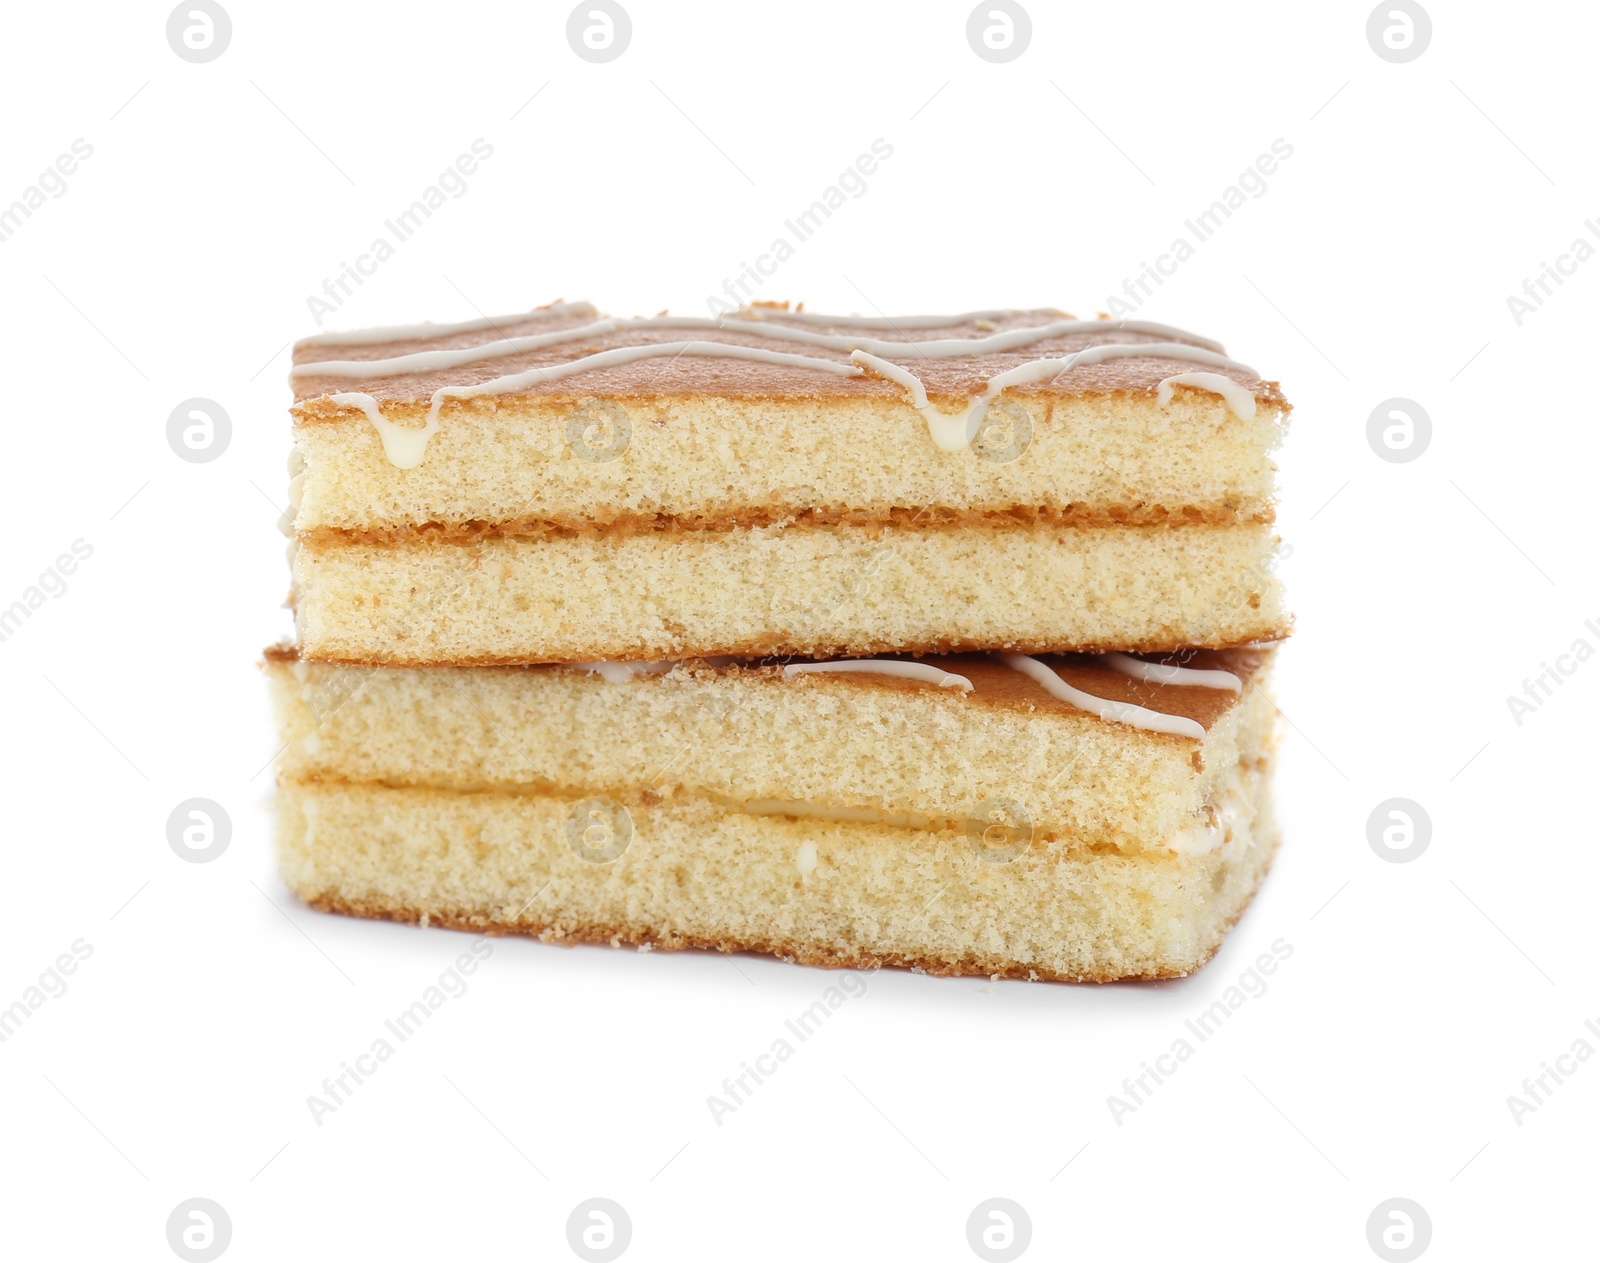 Photo of Delicious homemade sponge cakes isolated on white